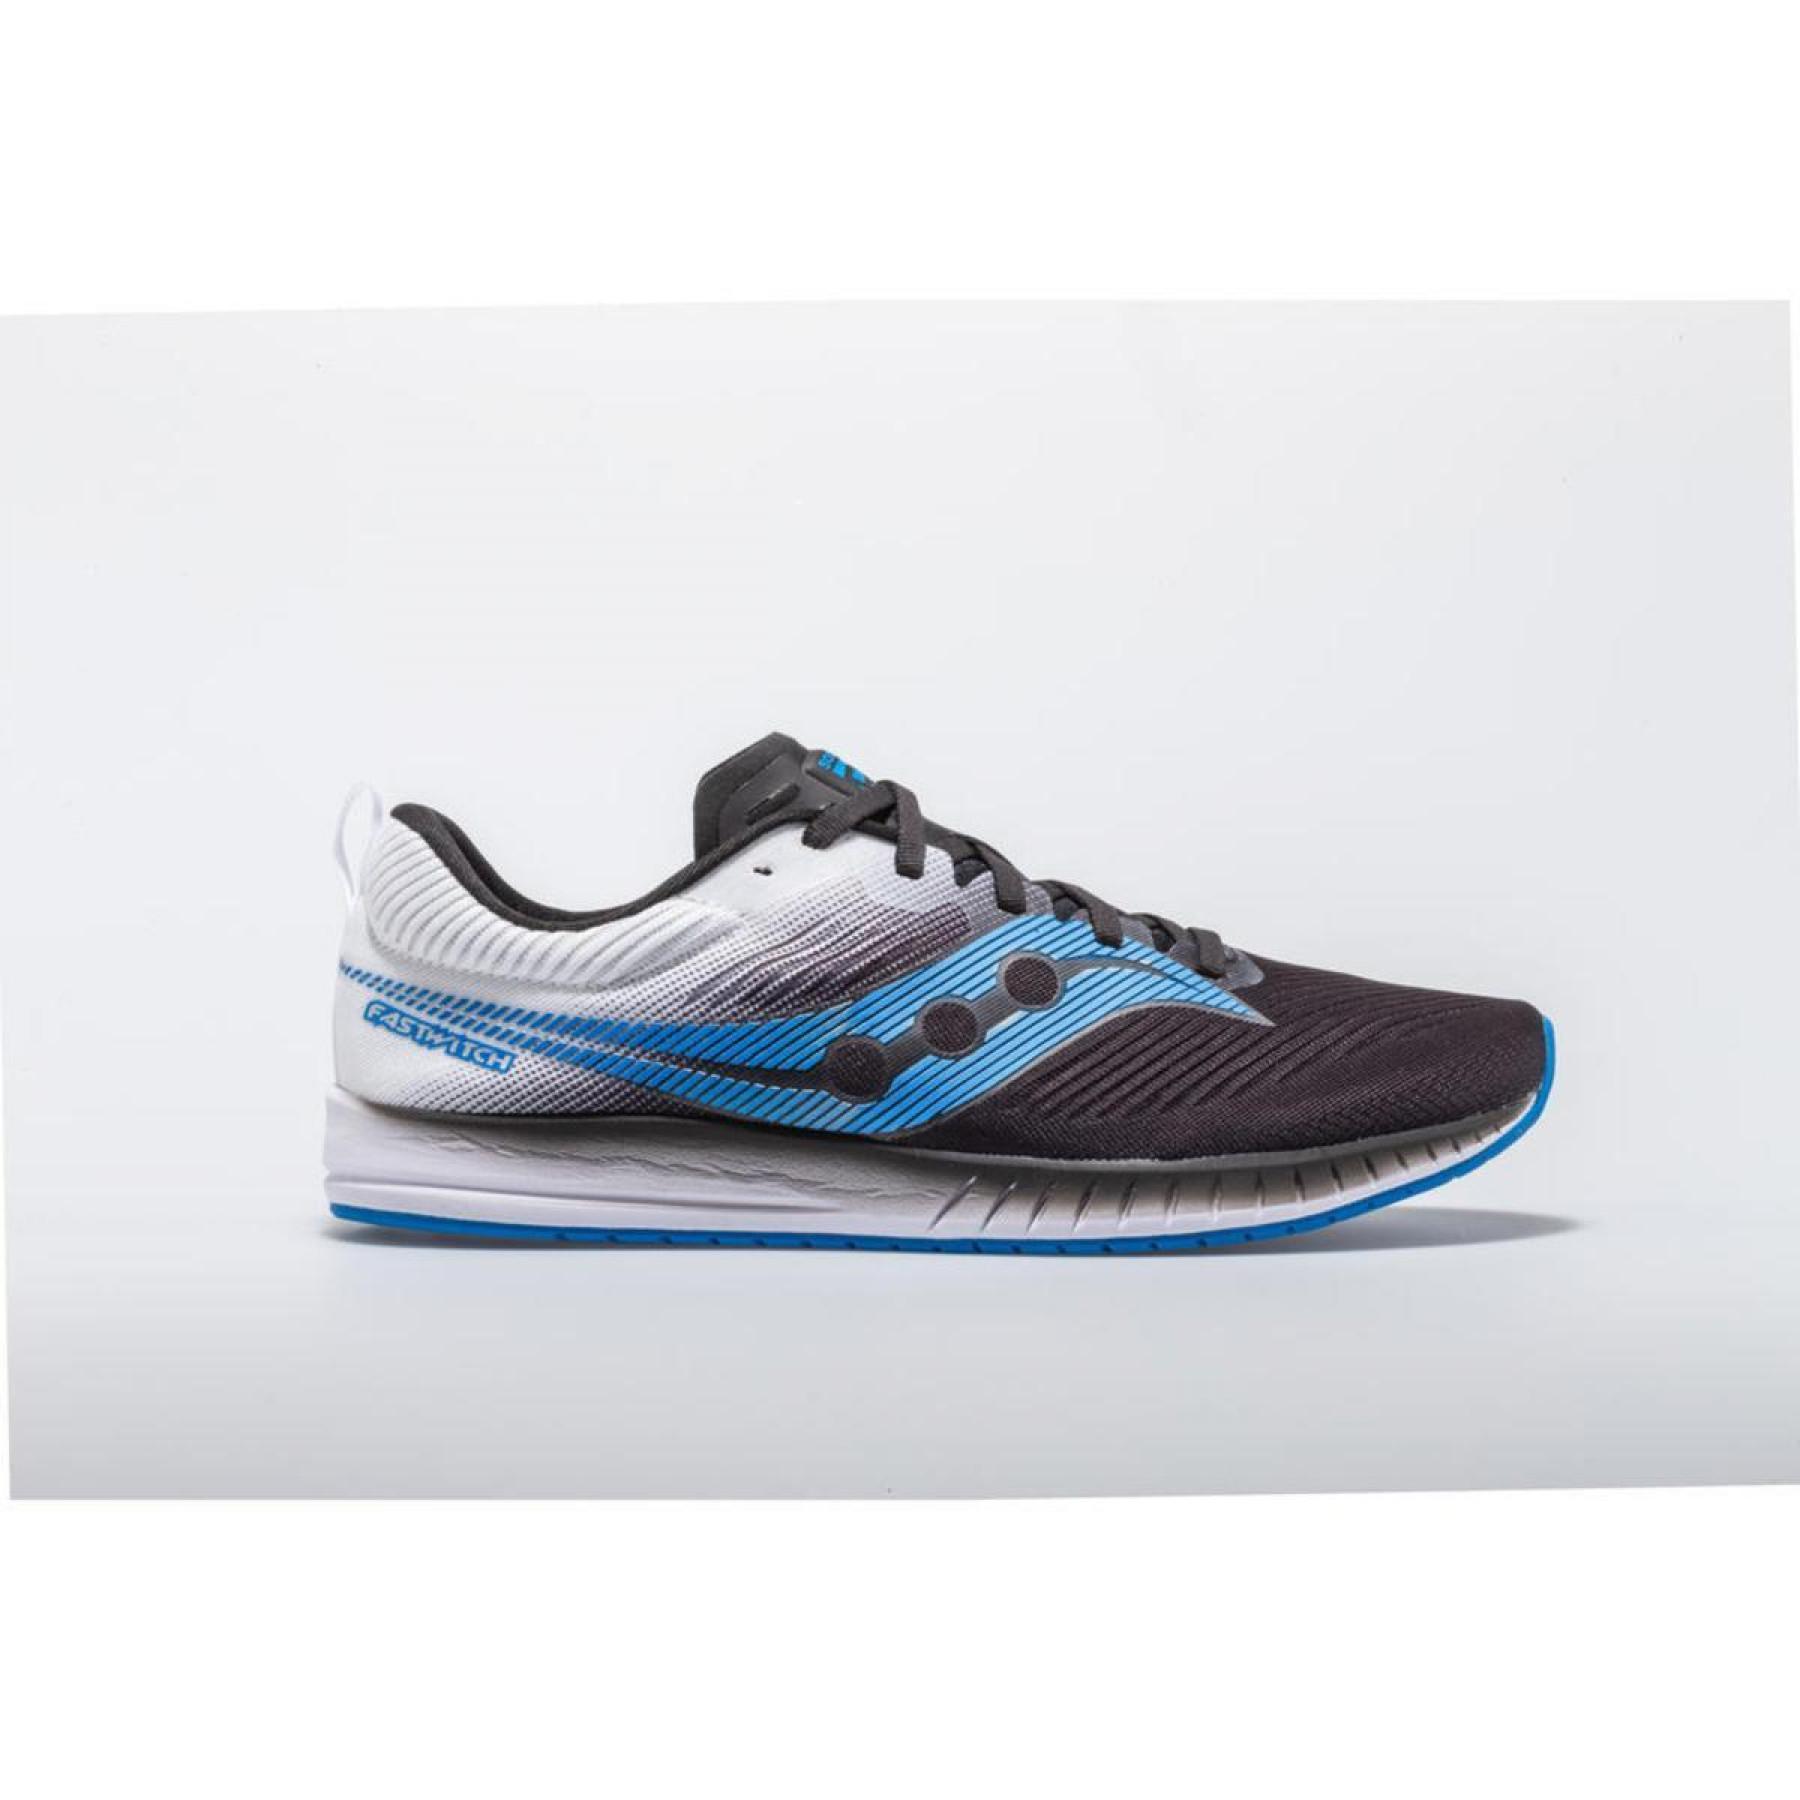 Shoes Saucony Fastwitch 9